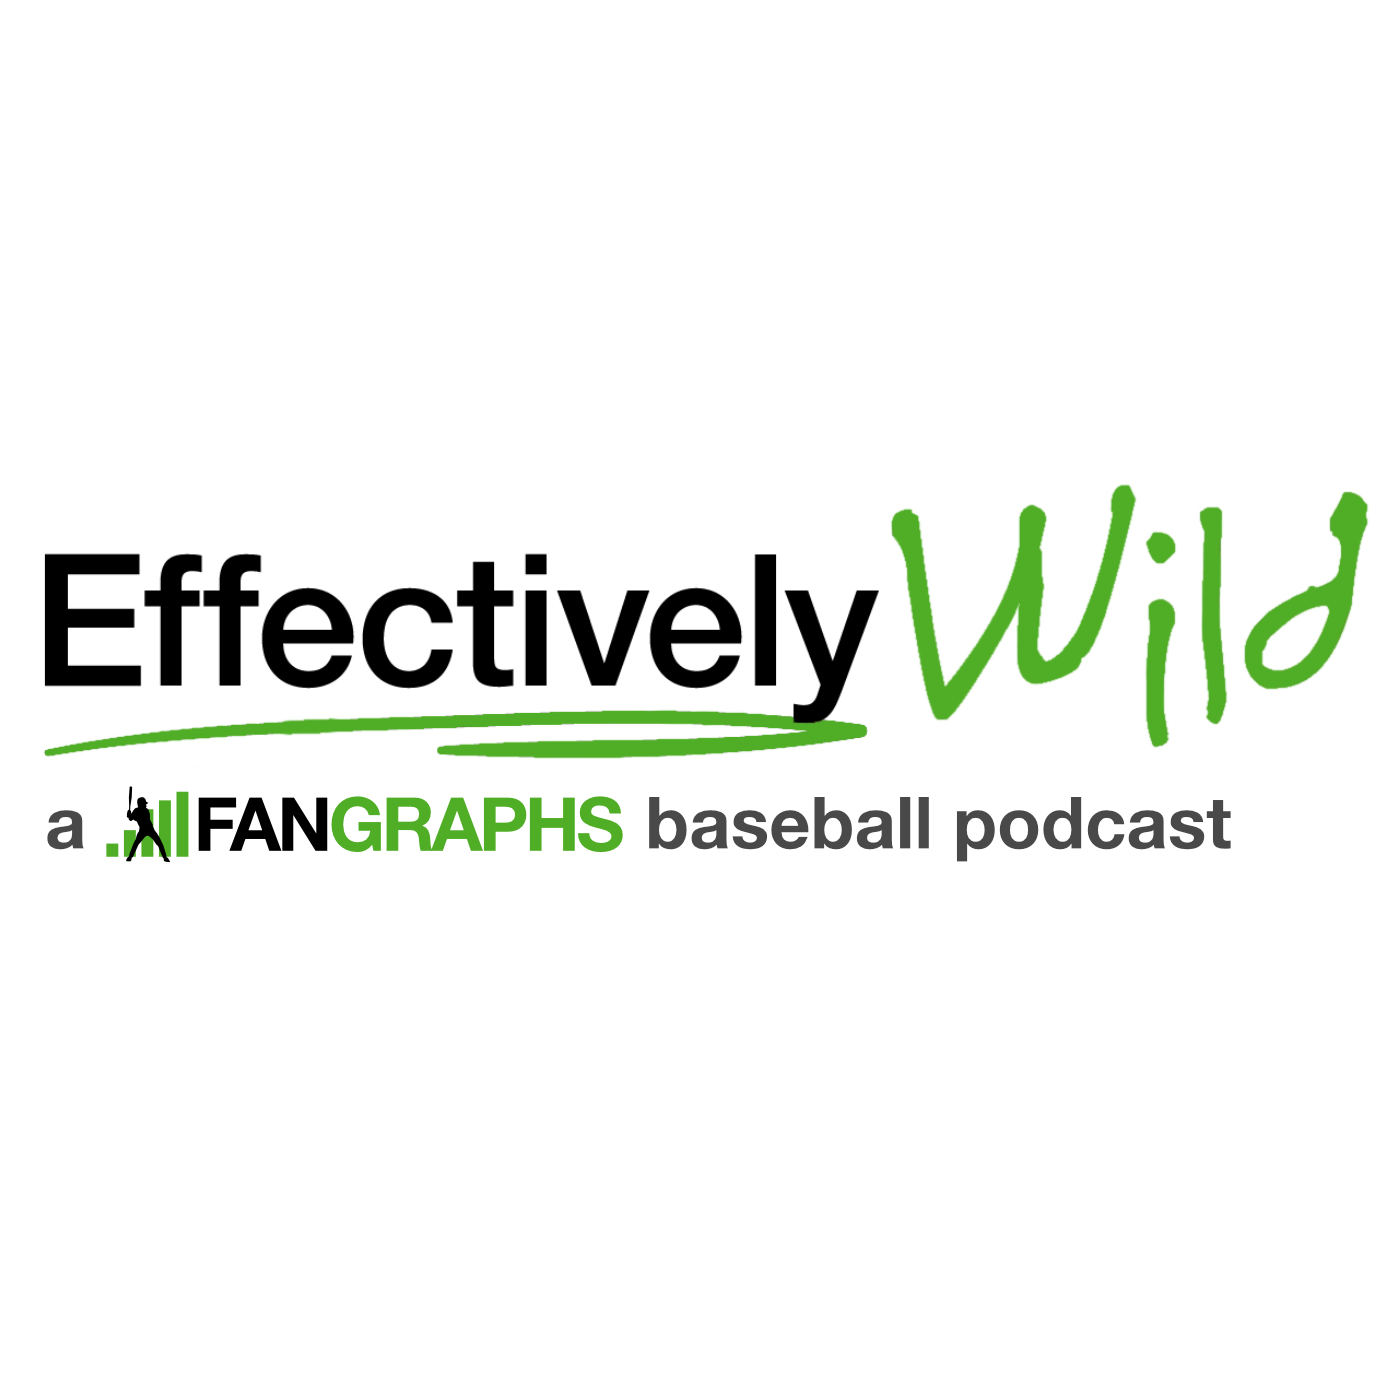 A highlight from Effectively Wild Episode 1880: The 10th Anniversary Interview